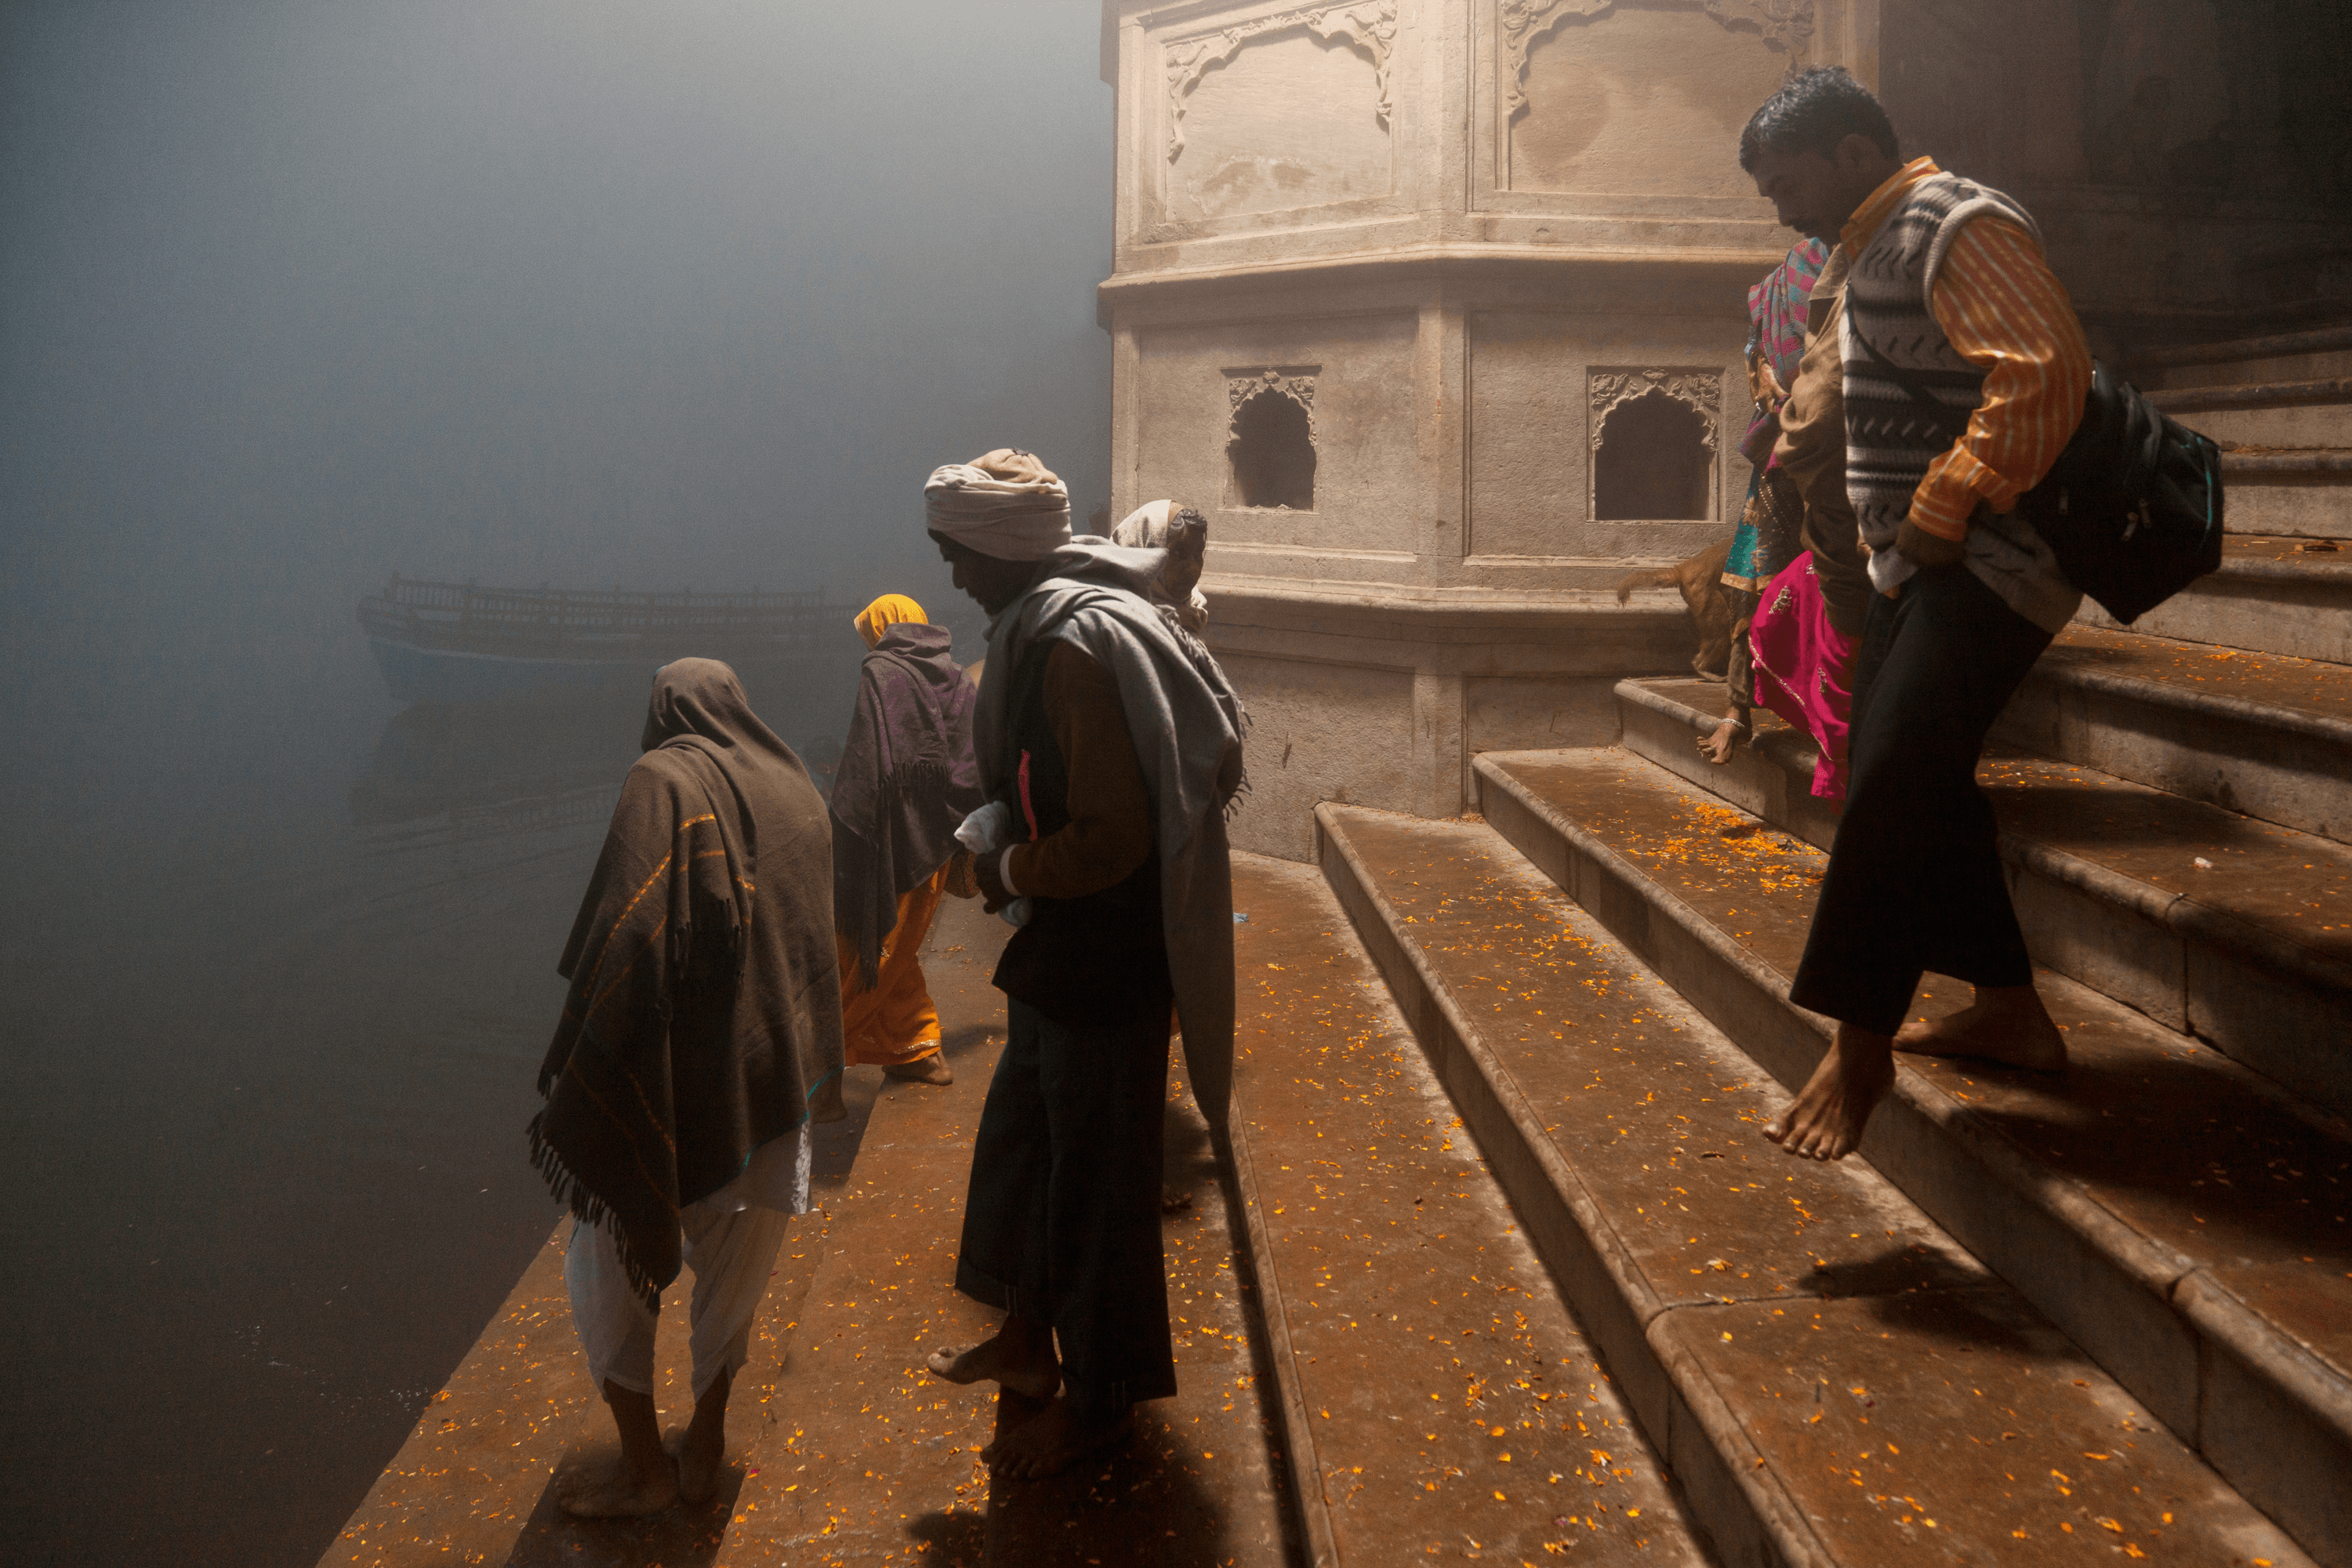 Descending to Yamuna River, The steps leading down to the Yamuna River #5/8